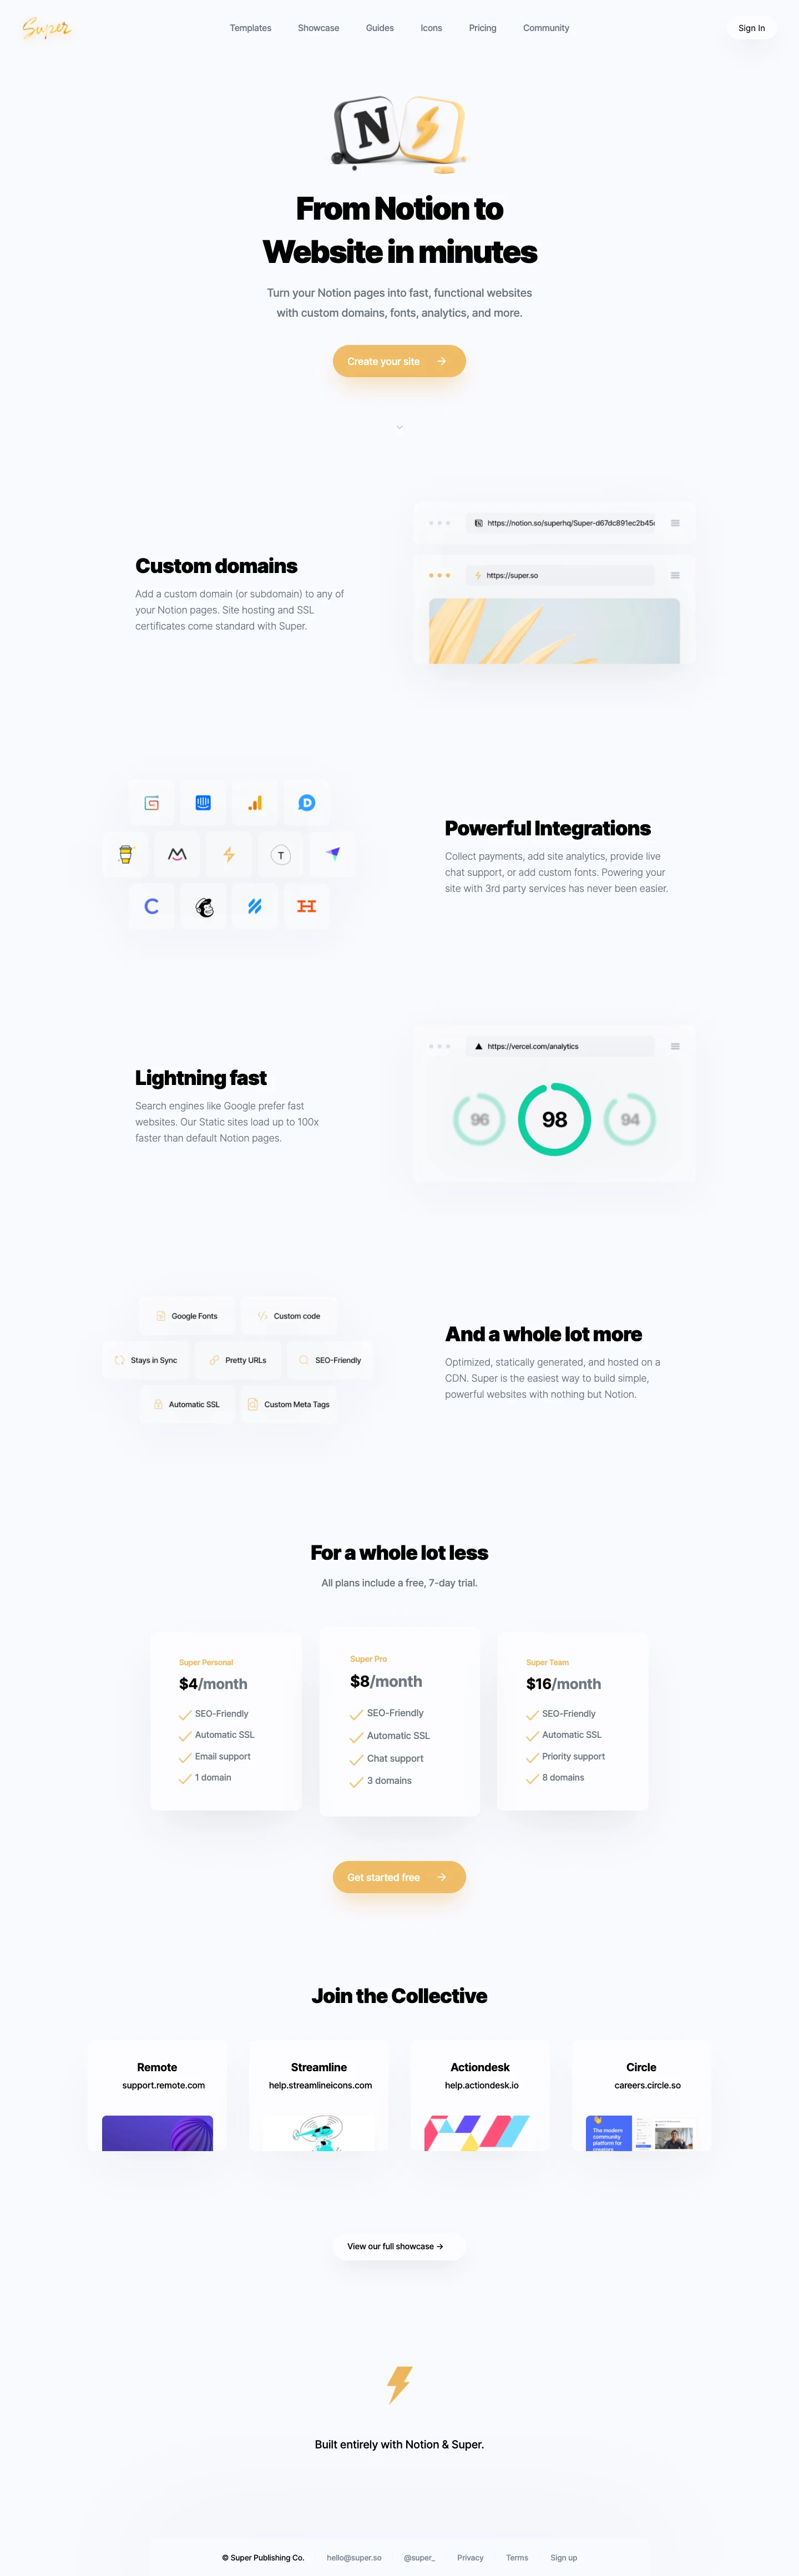 Super Landing Page Example: From Notion to Website in minutes. Turn your Notion pages into fast, functional websites with custom domains, fonts, analytics, and more.